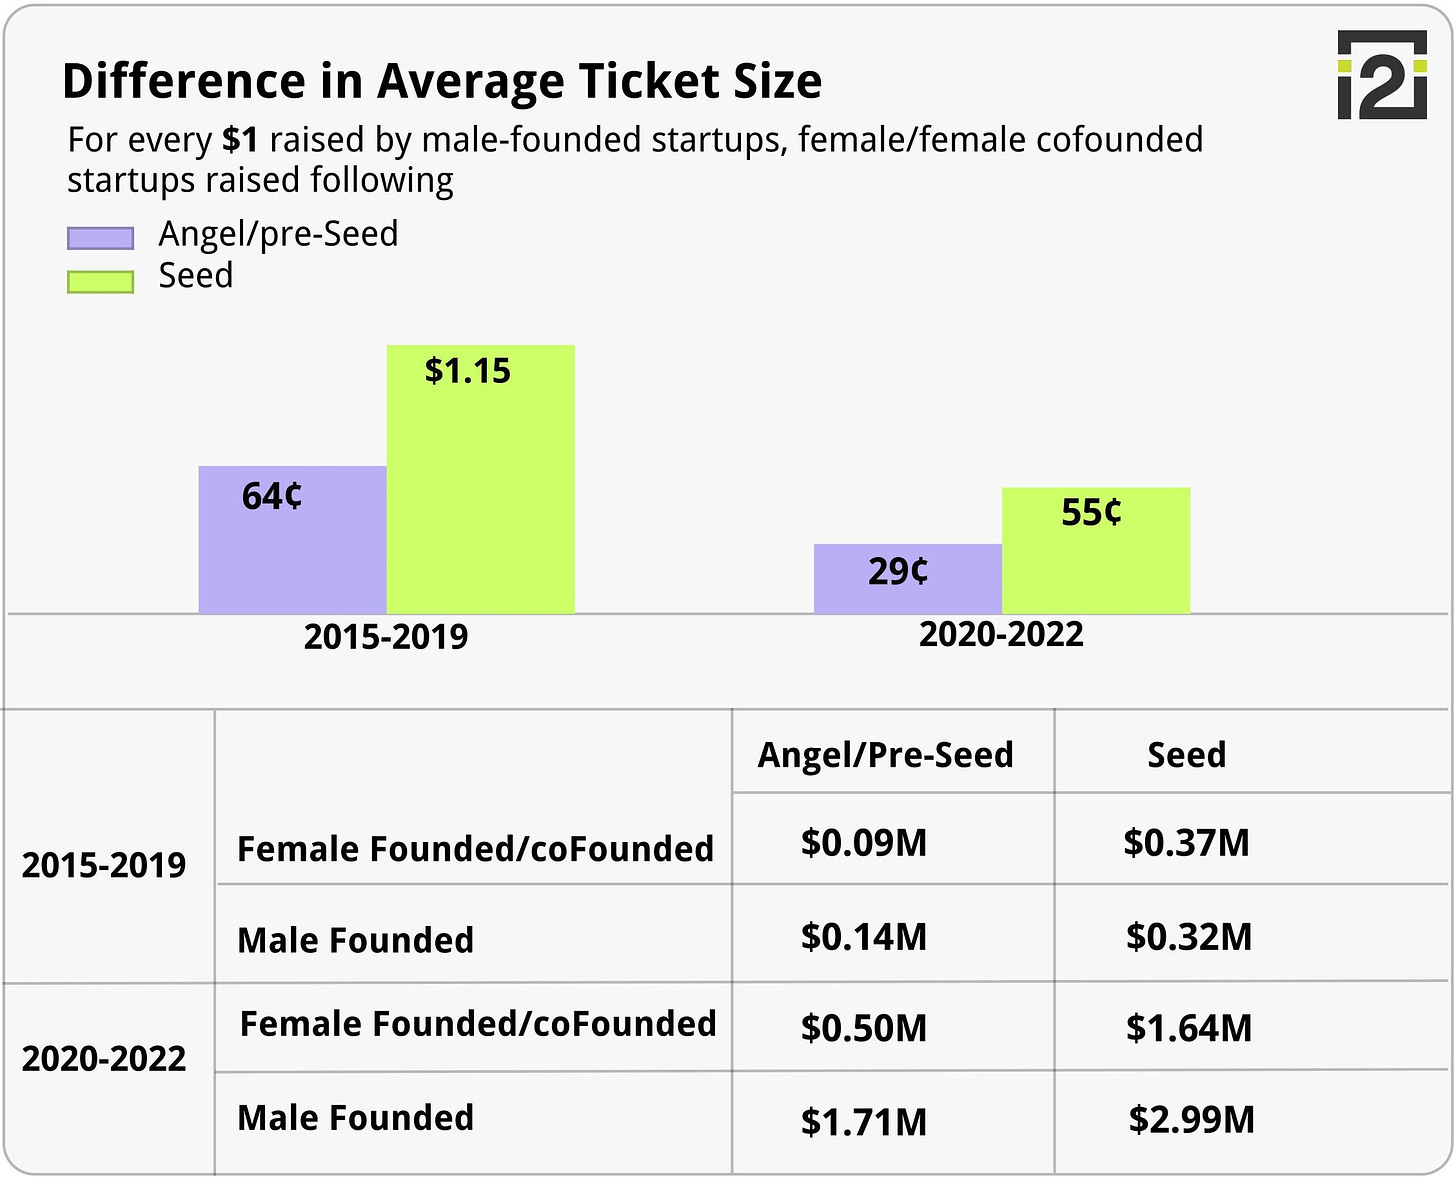 Difference in average ticket size between male founded companies and female founded and co-founded companies, 2015 - 2019 - 2020 - 2022